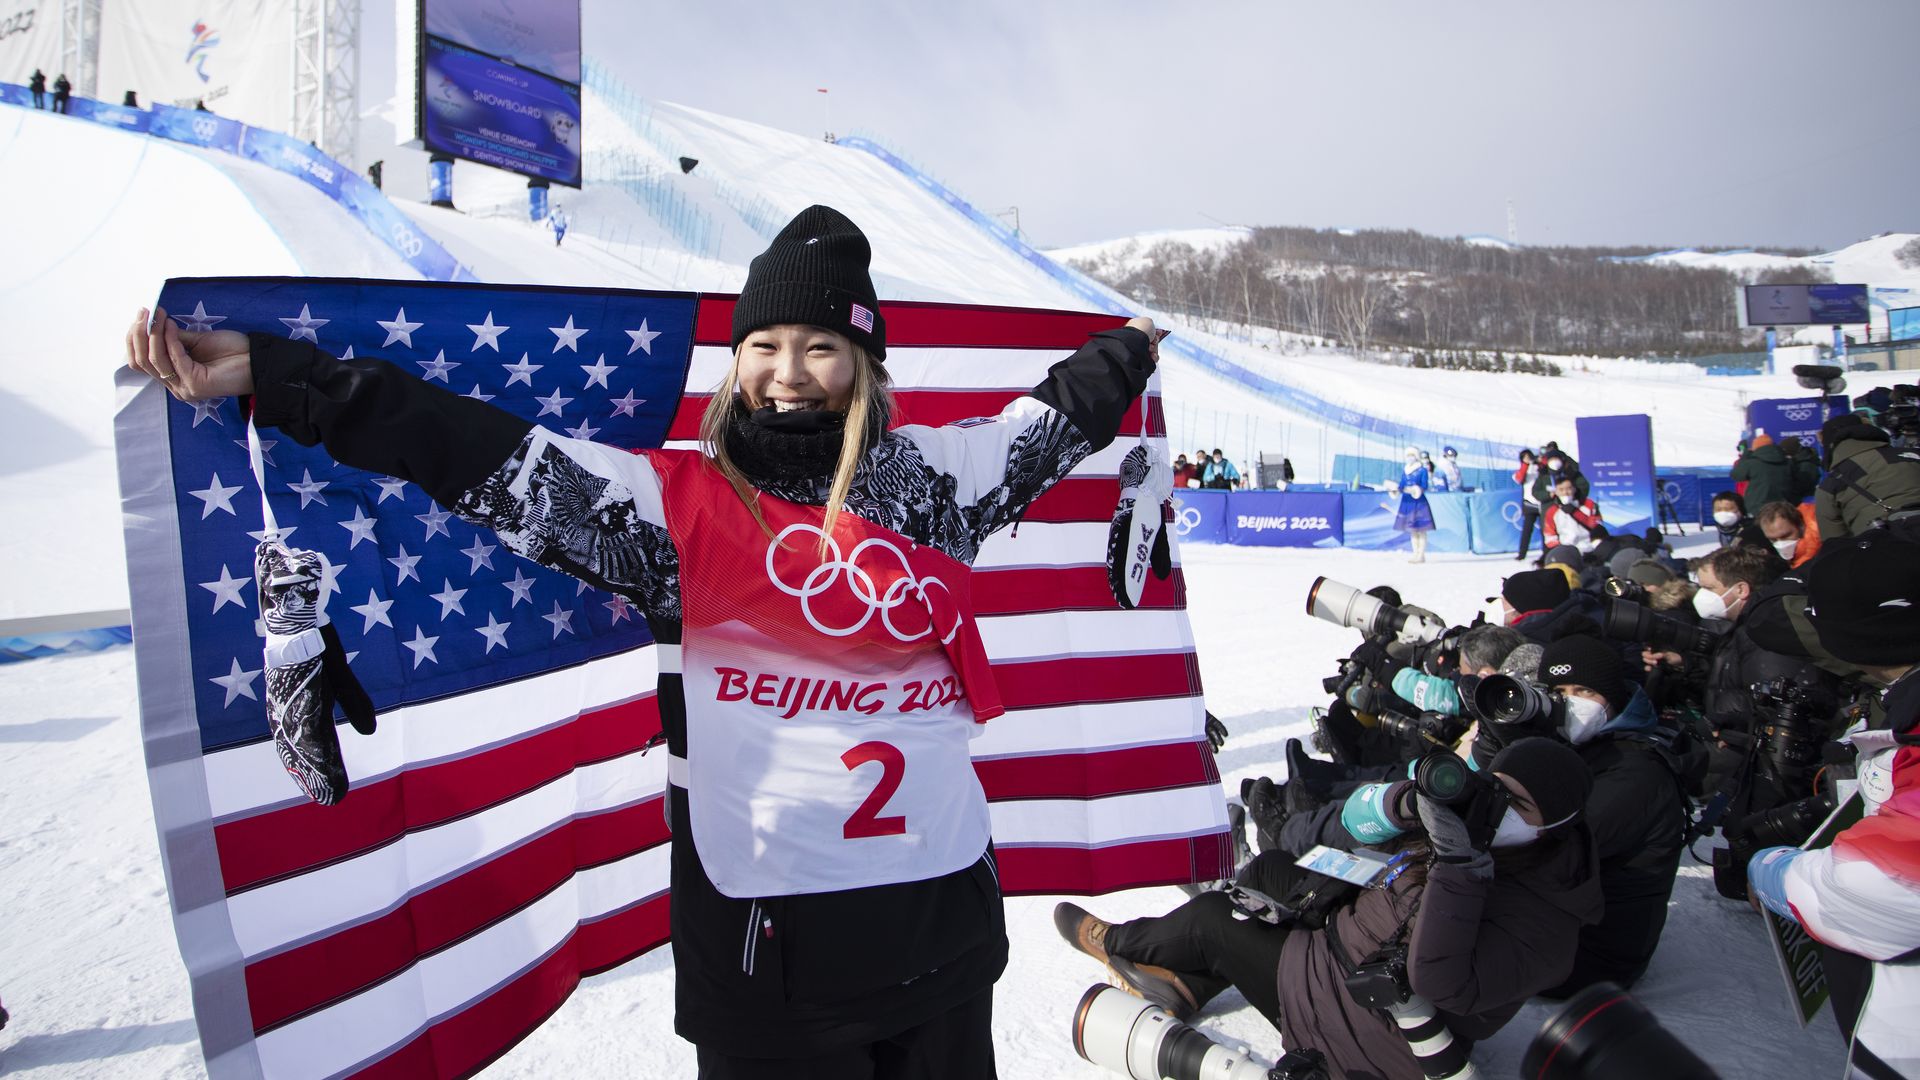  Chloe Kim of the US reacts with the United States flag after winning gold in the Women's Snowboard Halfpipe Final at the Winter Olympic Games on February 10th, 2022 in Zhangjiakou, China. (